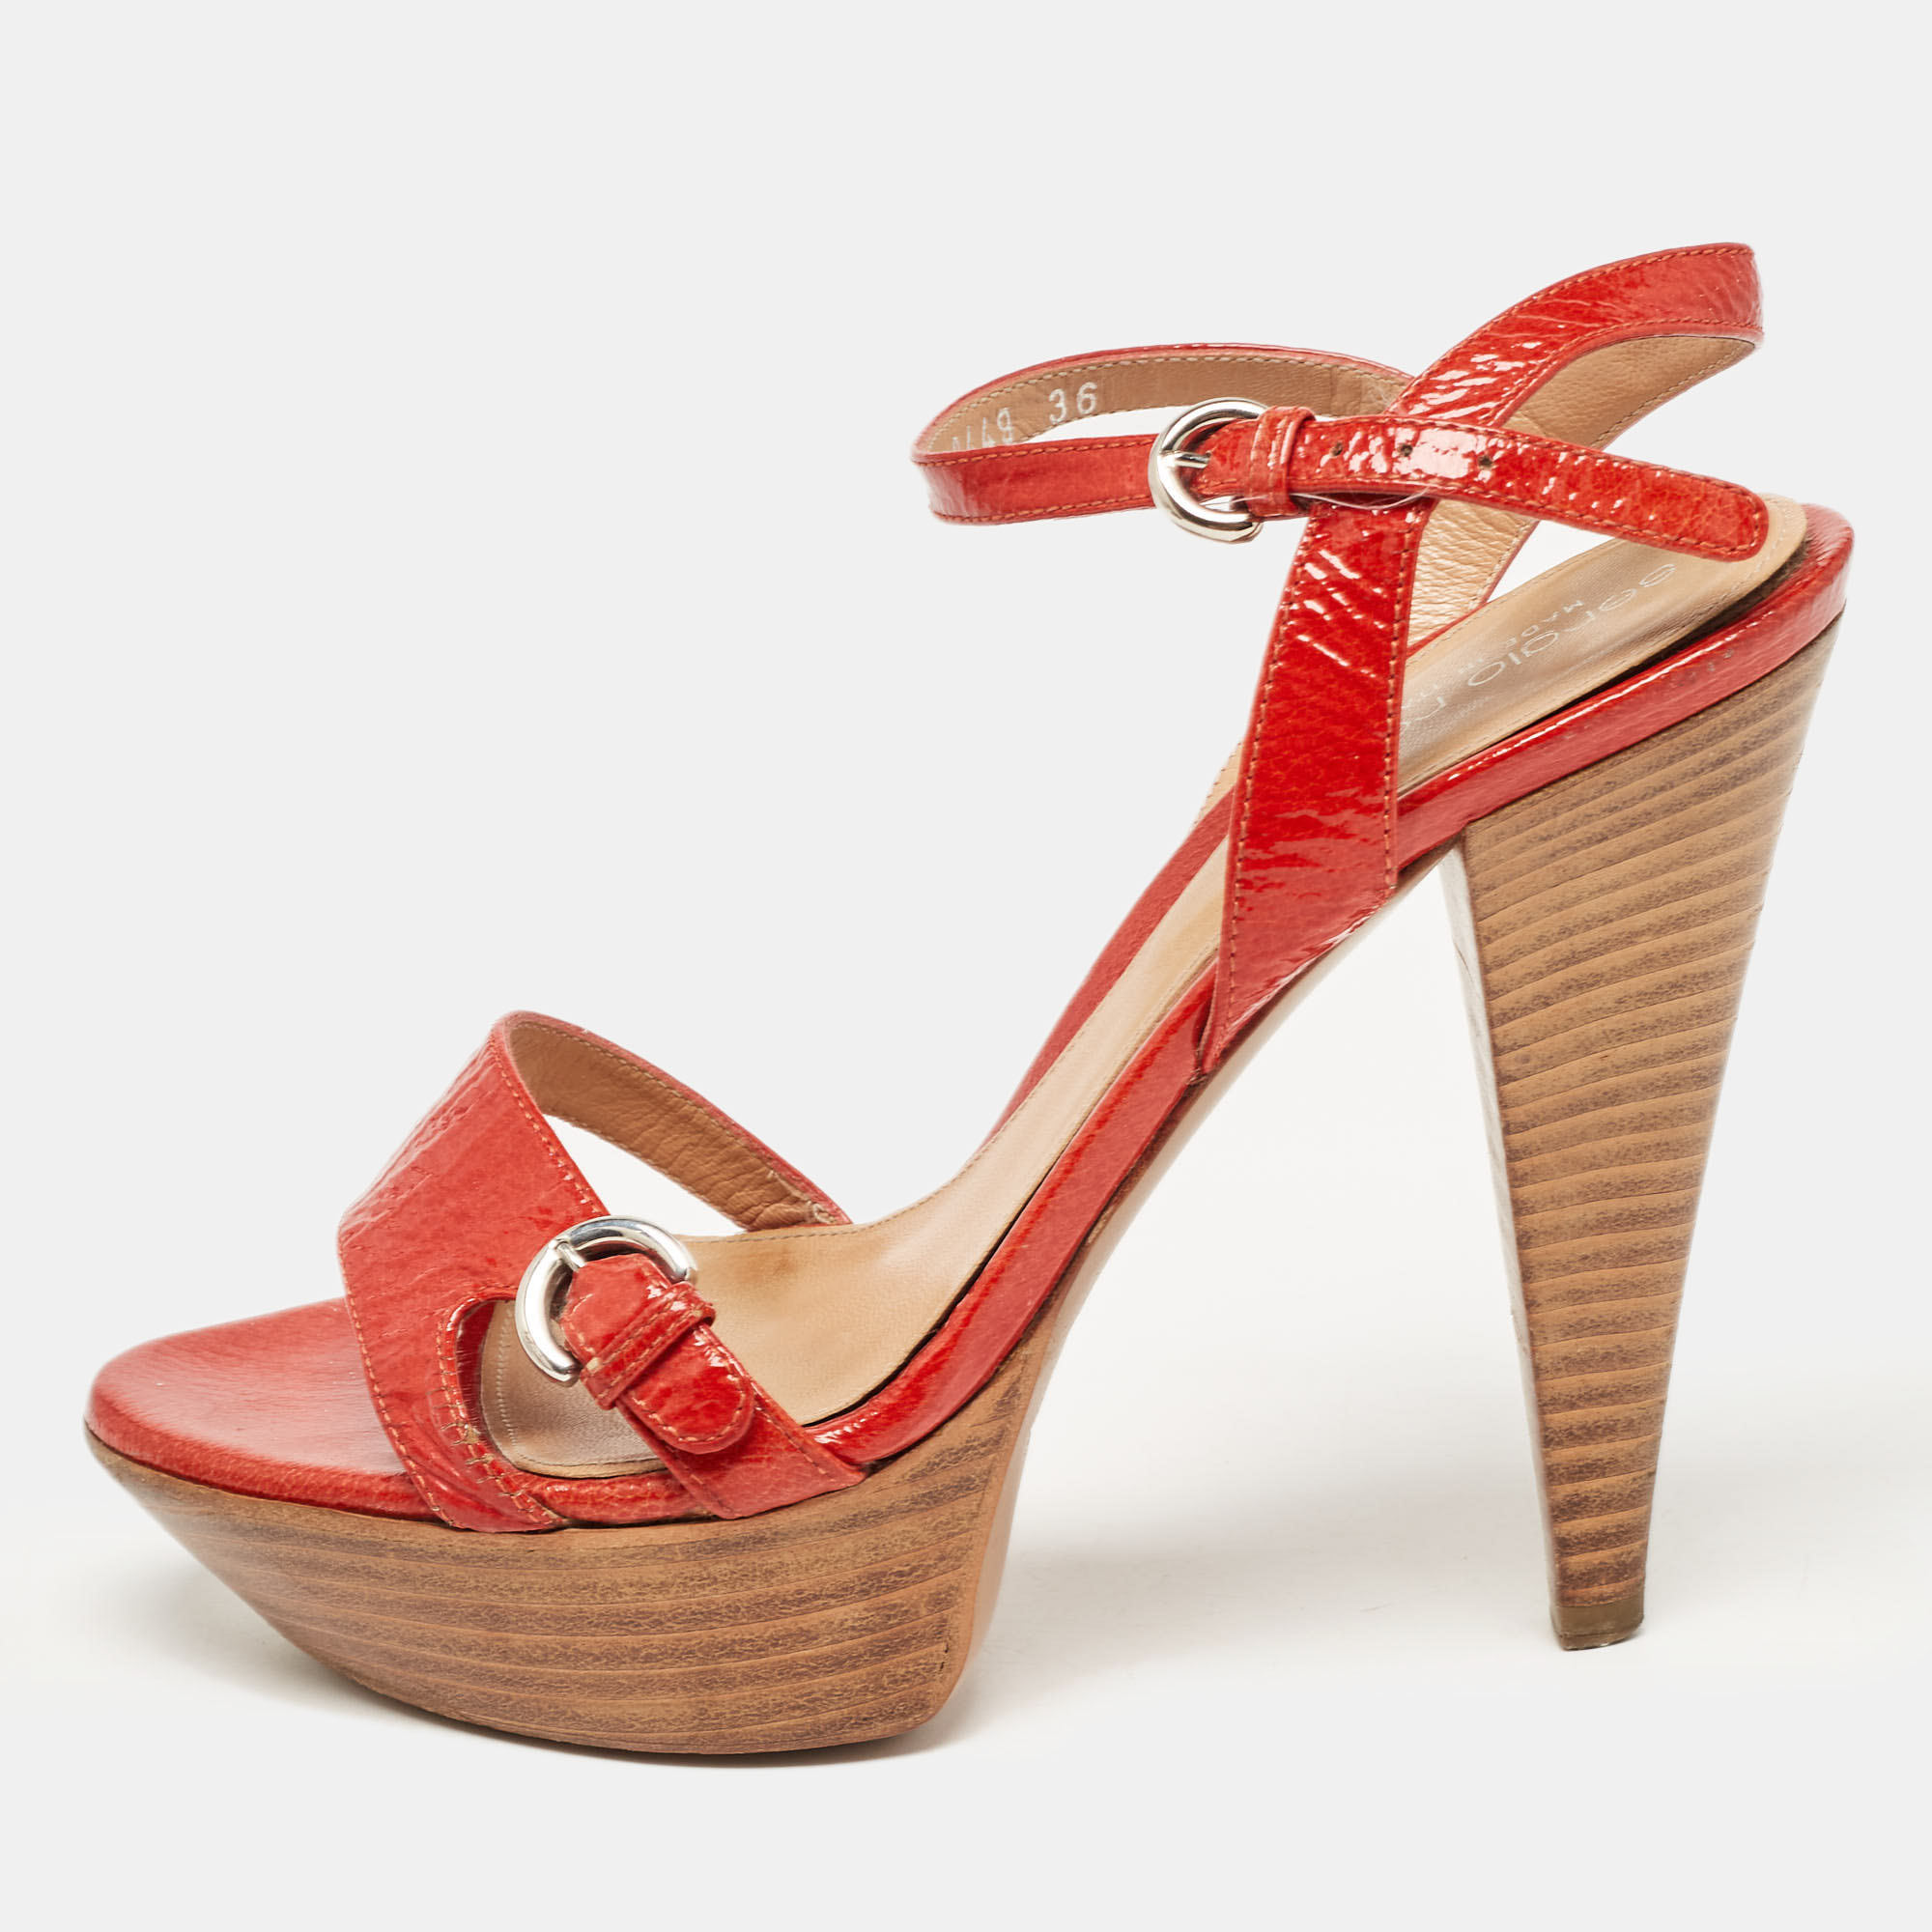 Sergio rossi red patent leather slingback sandals size 36